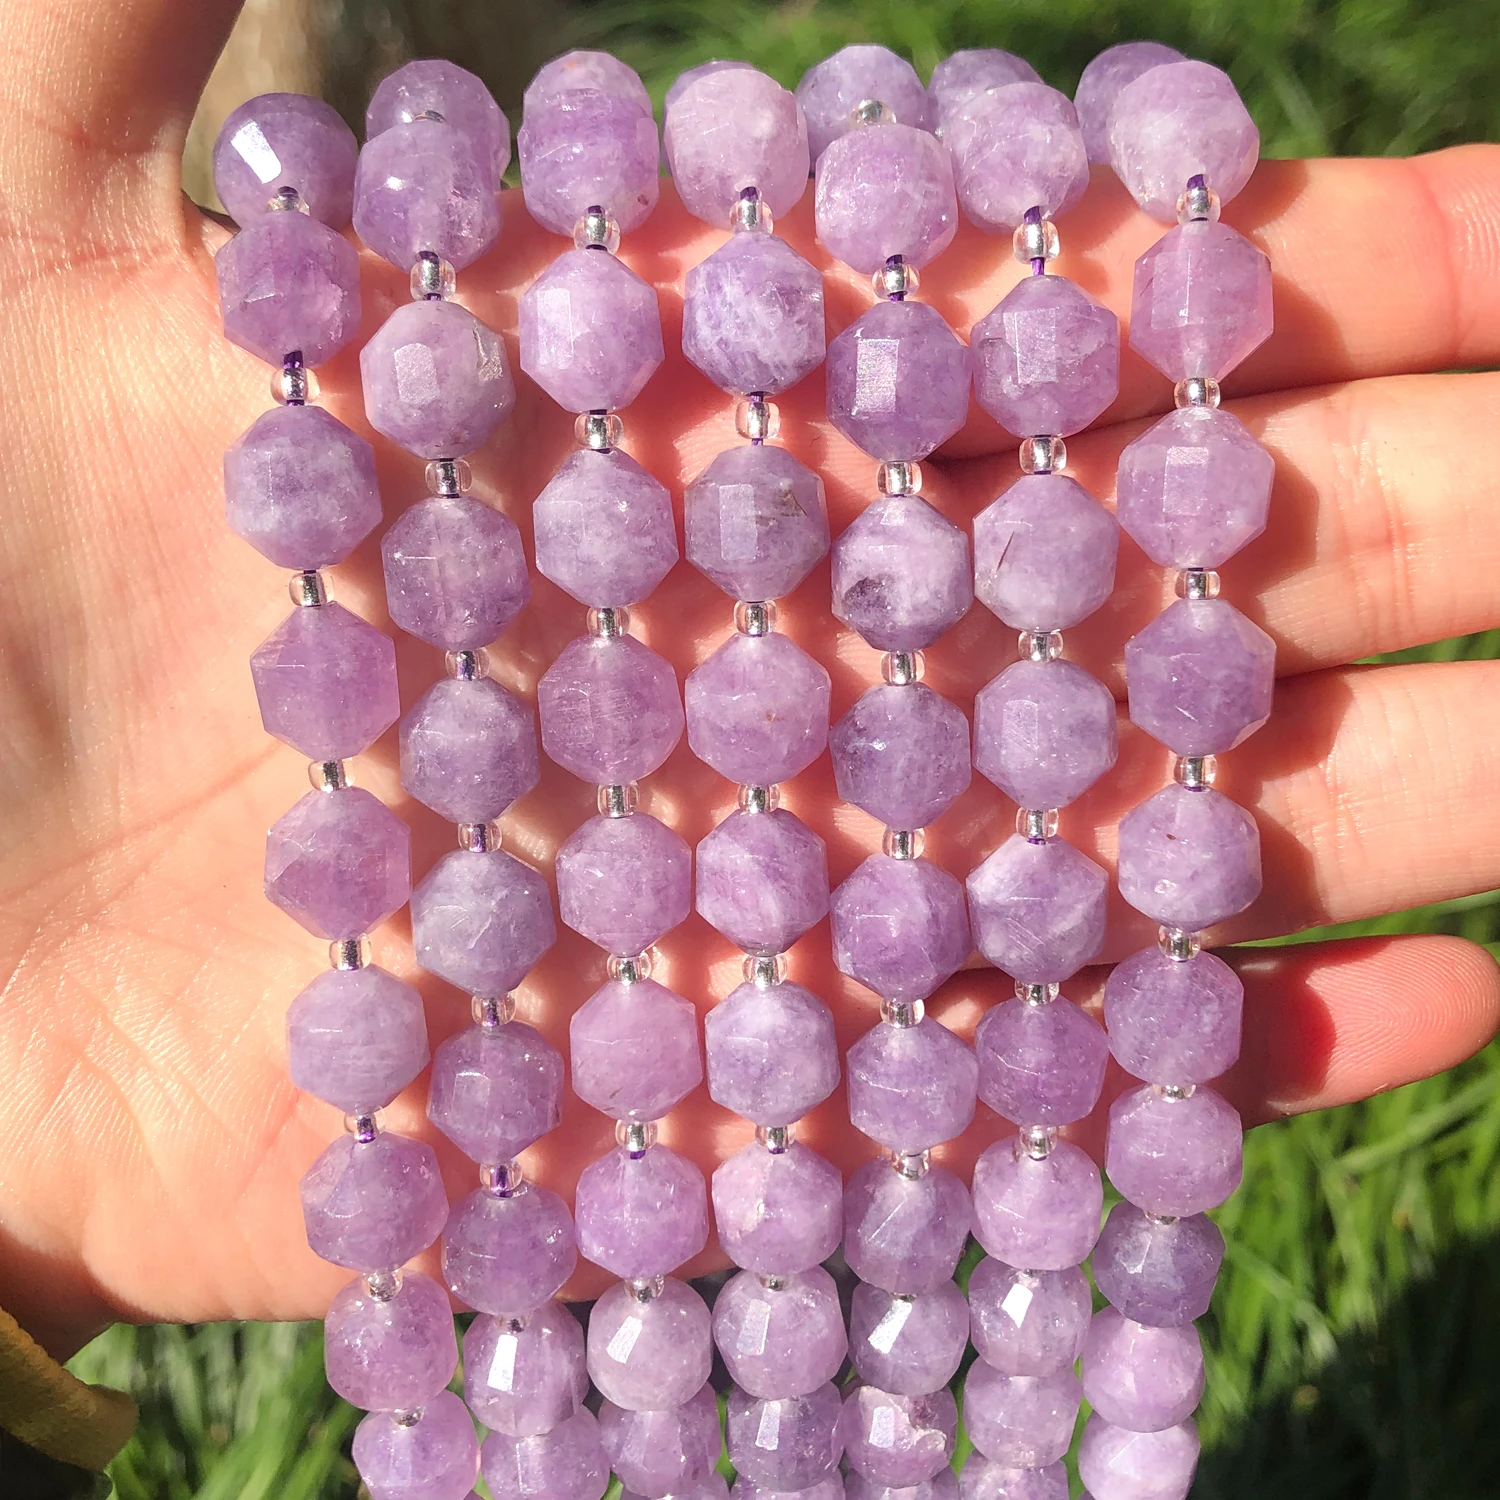 Natural Stone Faceted Amethyst Beads OIive Shape Loose Stone Beads For Jewelry DIY Making Bracelet Accessories 8 10mm 15 Inches